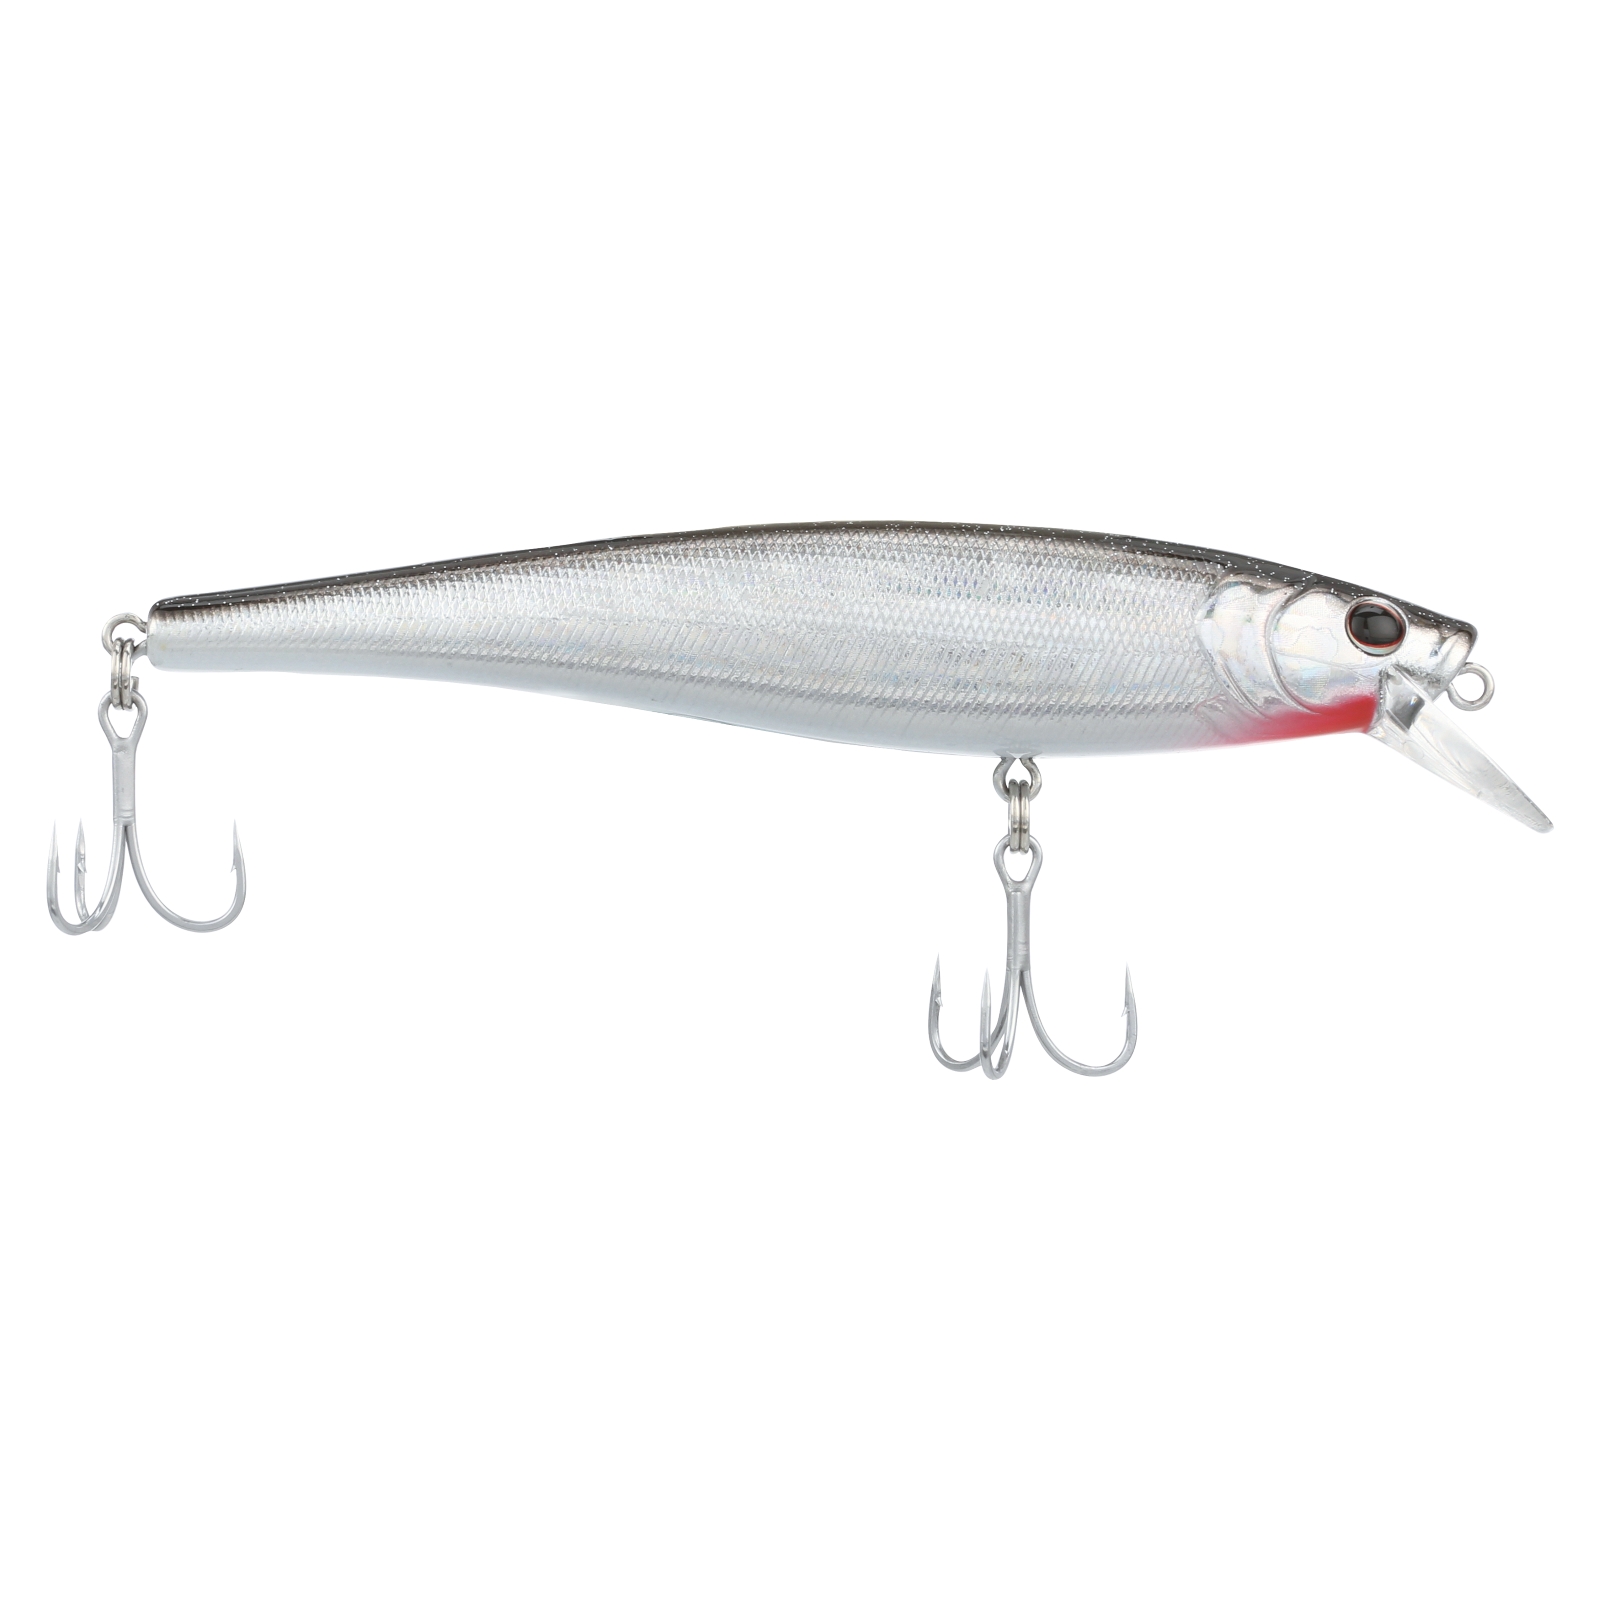 New Saltwater Hard Bait and Added Sizes from Berkley